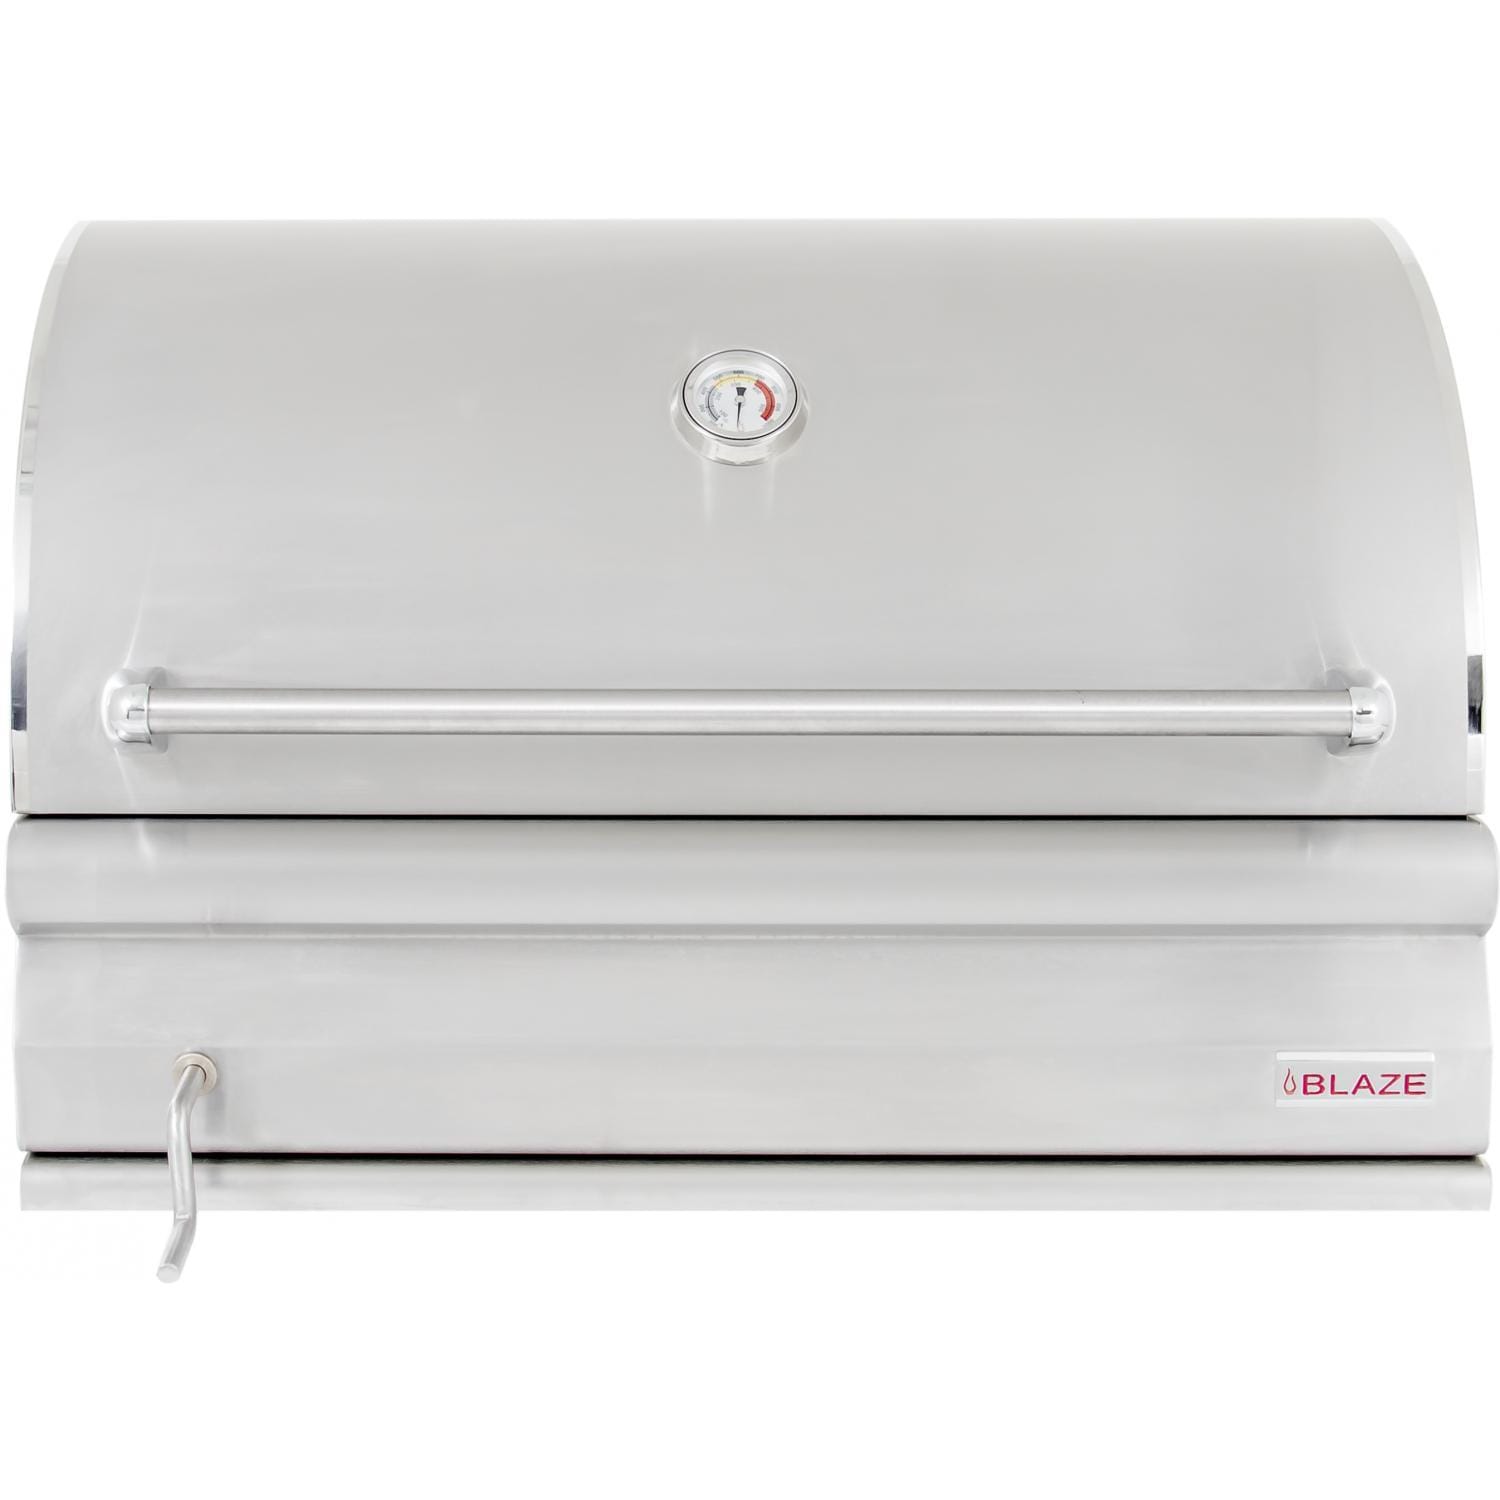 Blaze Charcoal Grill Blaze 32-Inch | Free-Standing | Stainless Steel Charcoal Grill With Adjustable Charcoal Tray - BLZ-4-CHAR